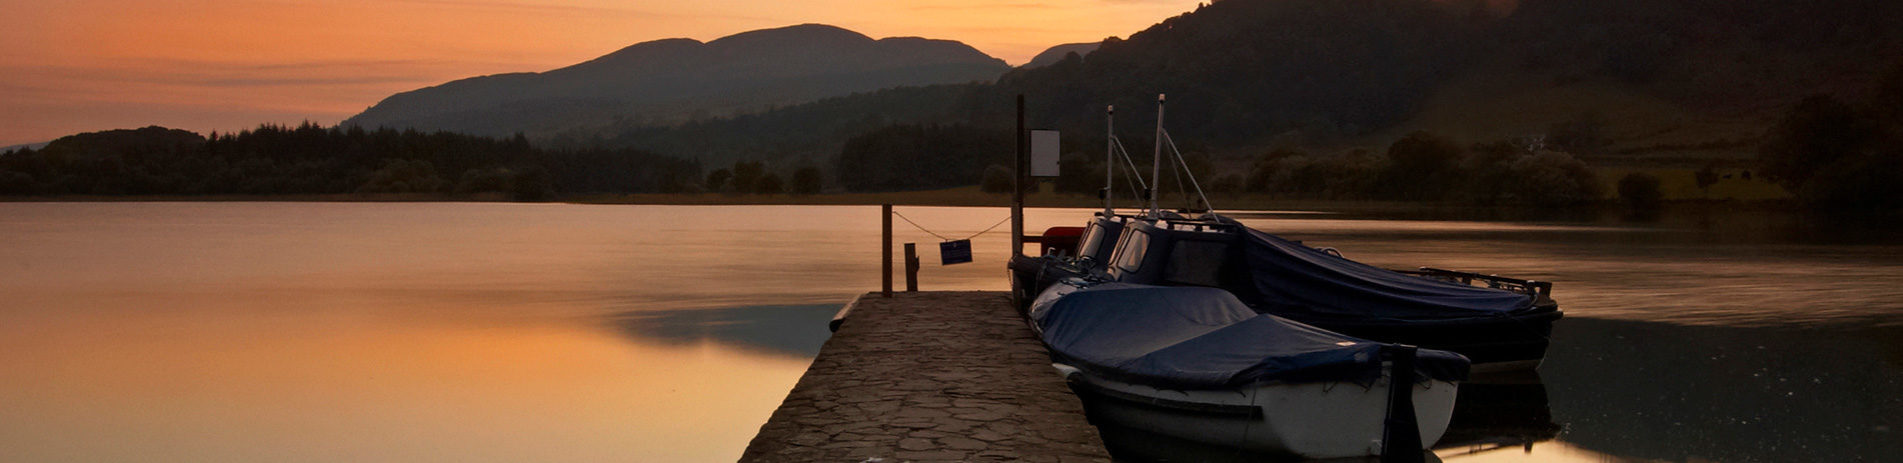 ferry-pier-at-sunset-at-lake-of-menteith-with-moored-boats-one-end-and-hills-in-the-distance